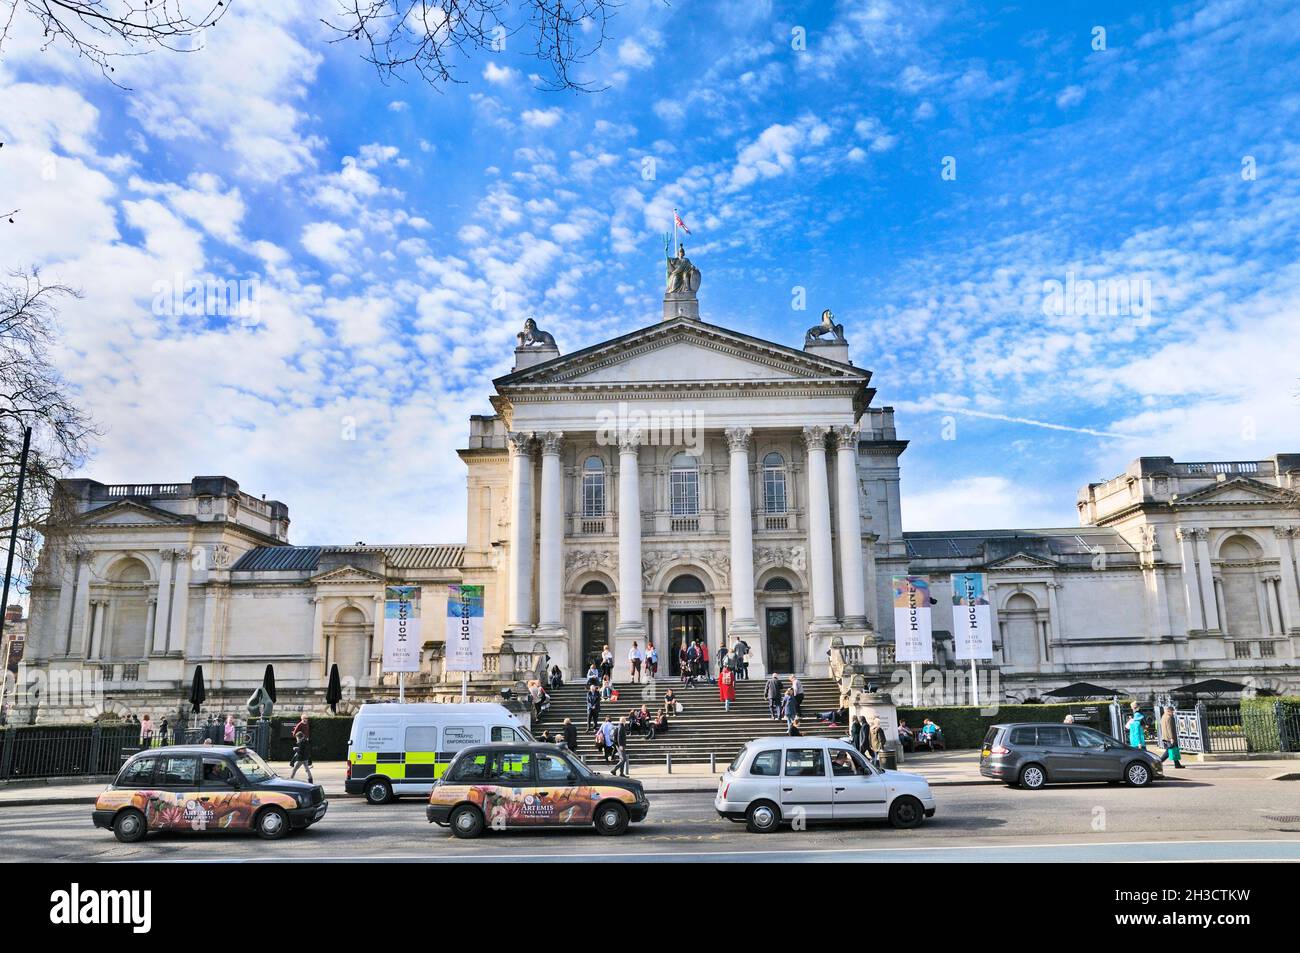 Tate Britain Art Gallery museum on Millbank, City of Westminster, London, England, UK. Stock Photo